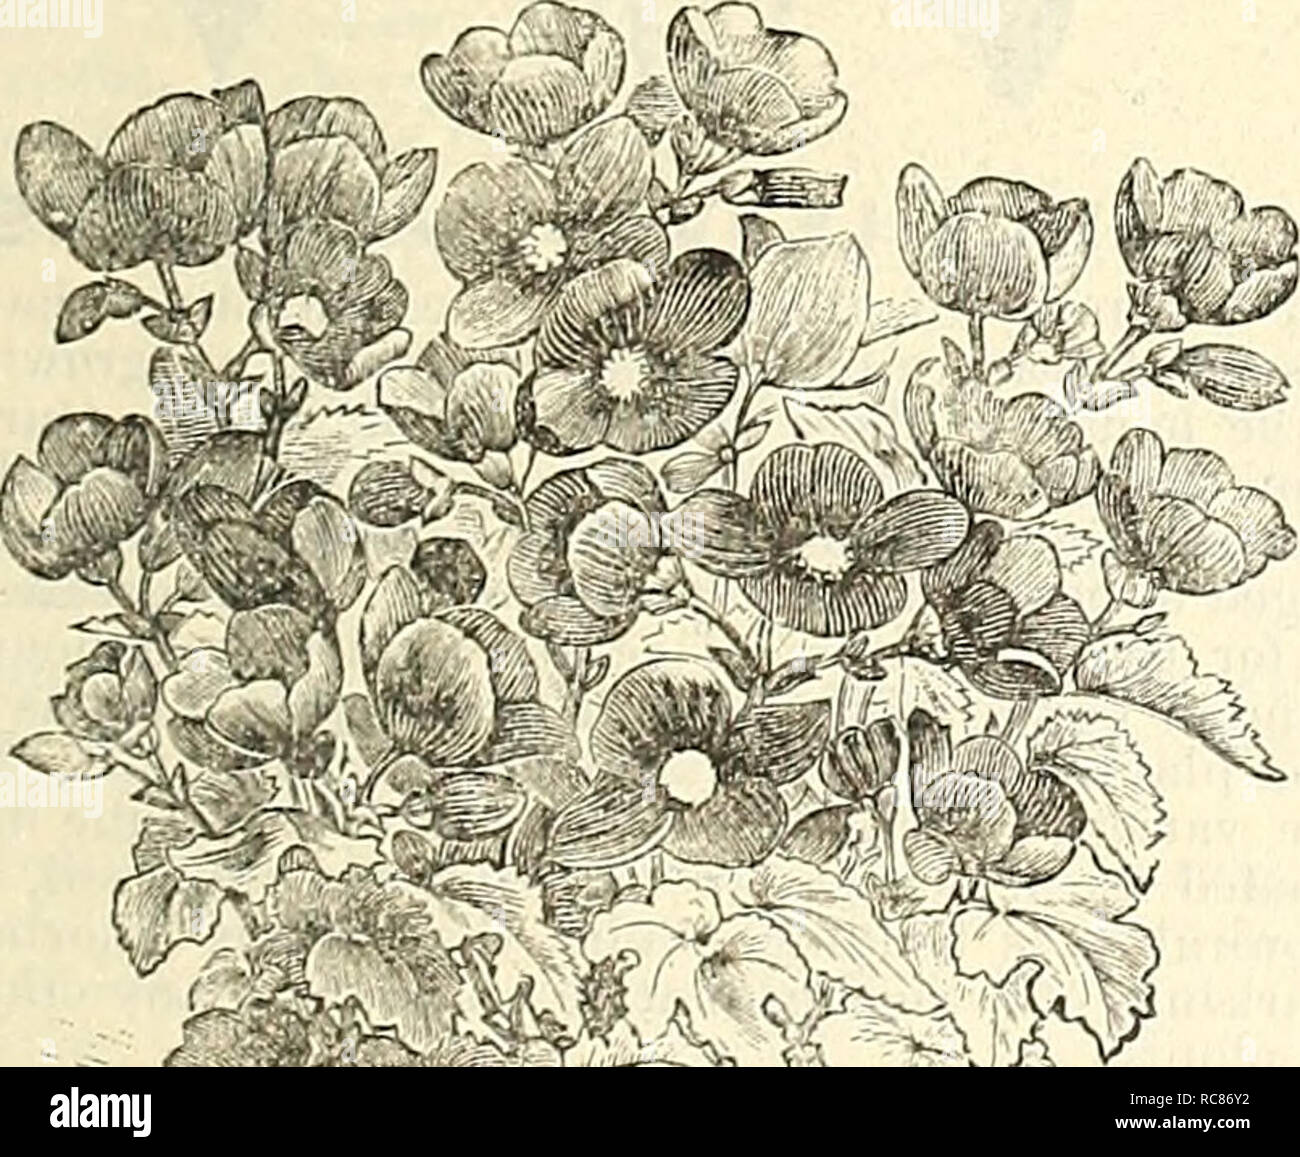 . Dreer's garden calendar : 1886. Seeds Catalogs; Nursery stock Catalogs; Gardening Catalogs; Flowers Seeds Catalogs; Gardening Equipment and supplies Catalogs. •^&quot;^'h^m Begonia Rubra. Pearcei. Bright yellow flowers, deep green foliage variegated with black. Rosea Perfecta. Fine scarlet, splendid. Mixed Double. In the very finest kinds. Mixed Single. In extra fine mixture, from named varieties. TUUEKOUS-ROOTF.D BeGONIAS. TUBEROUS-ROOTED BEGONIAS. The Tuberous-Rooted Bi'sonias are among the hand- somest of our summer flowering bulbs. They are not grown to the extent they should be, as they Stock Photo